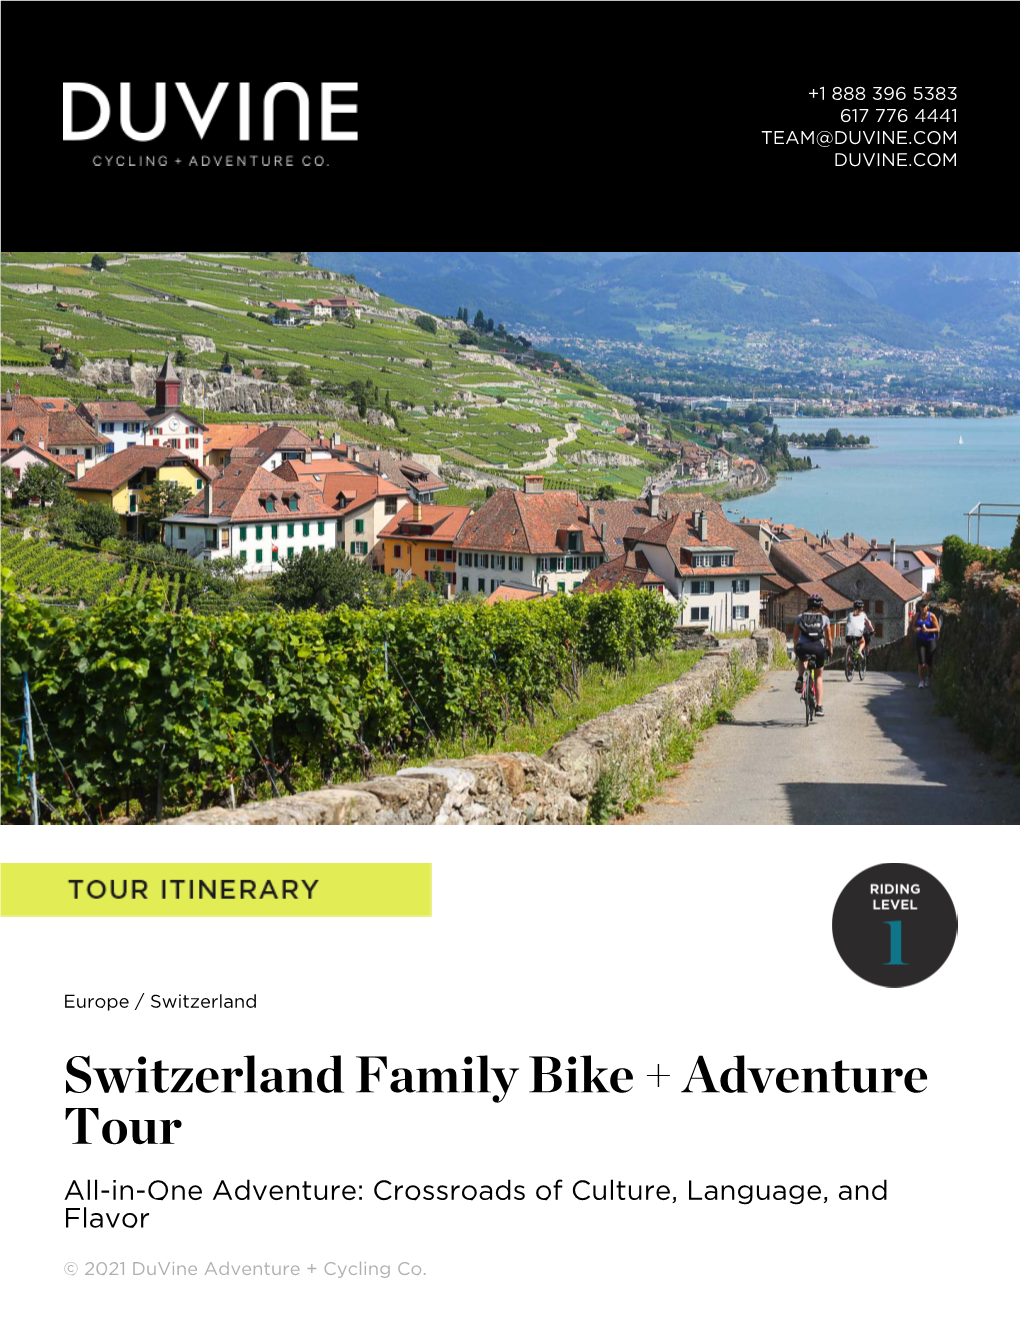 Switzerland Family Bike + Adventure Tour All-In-One Adventure: Crossroads of Culture, Language, and Flavor